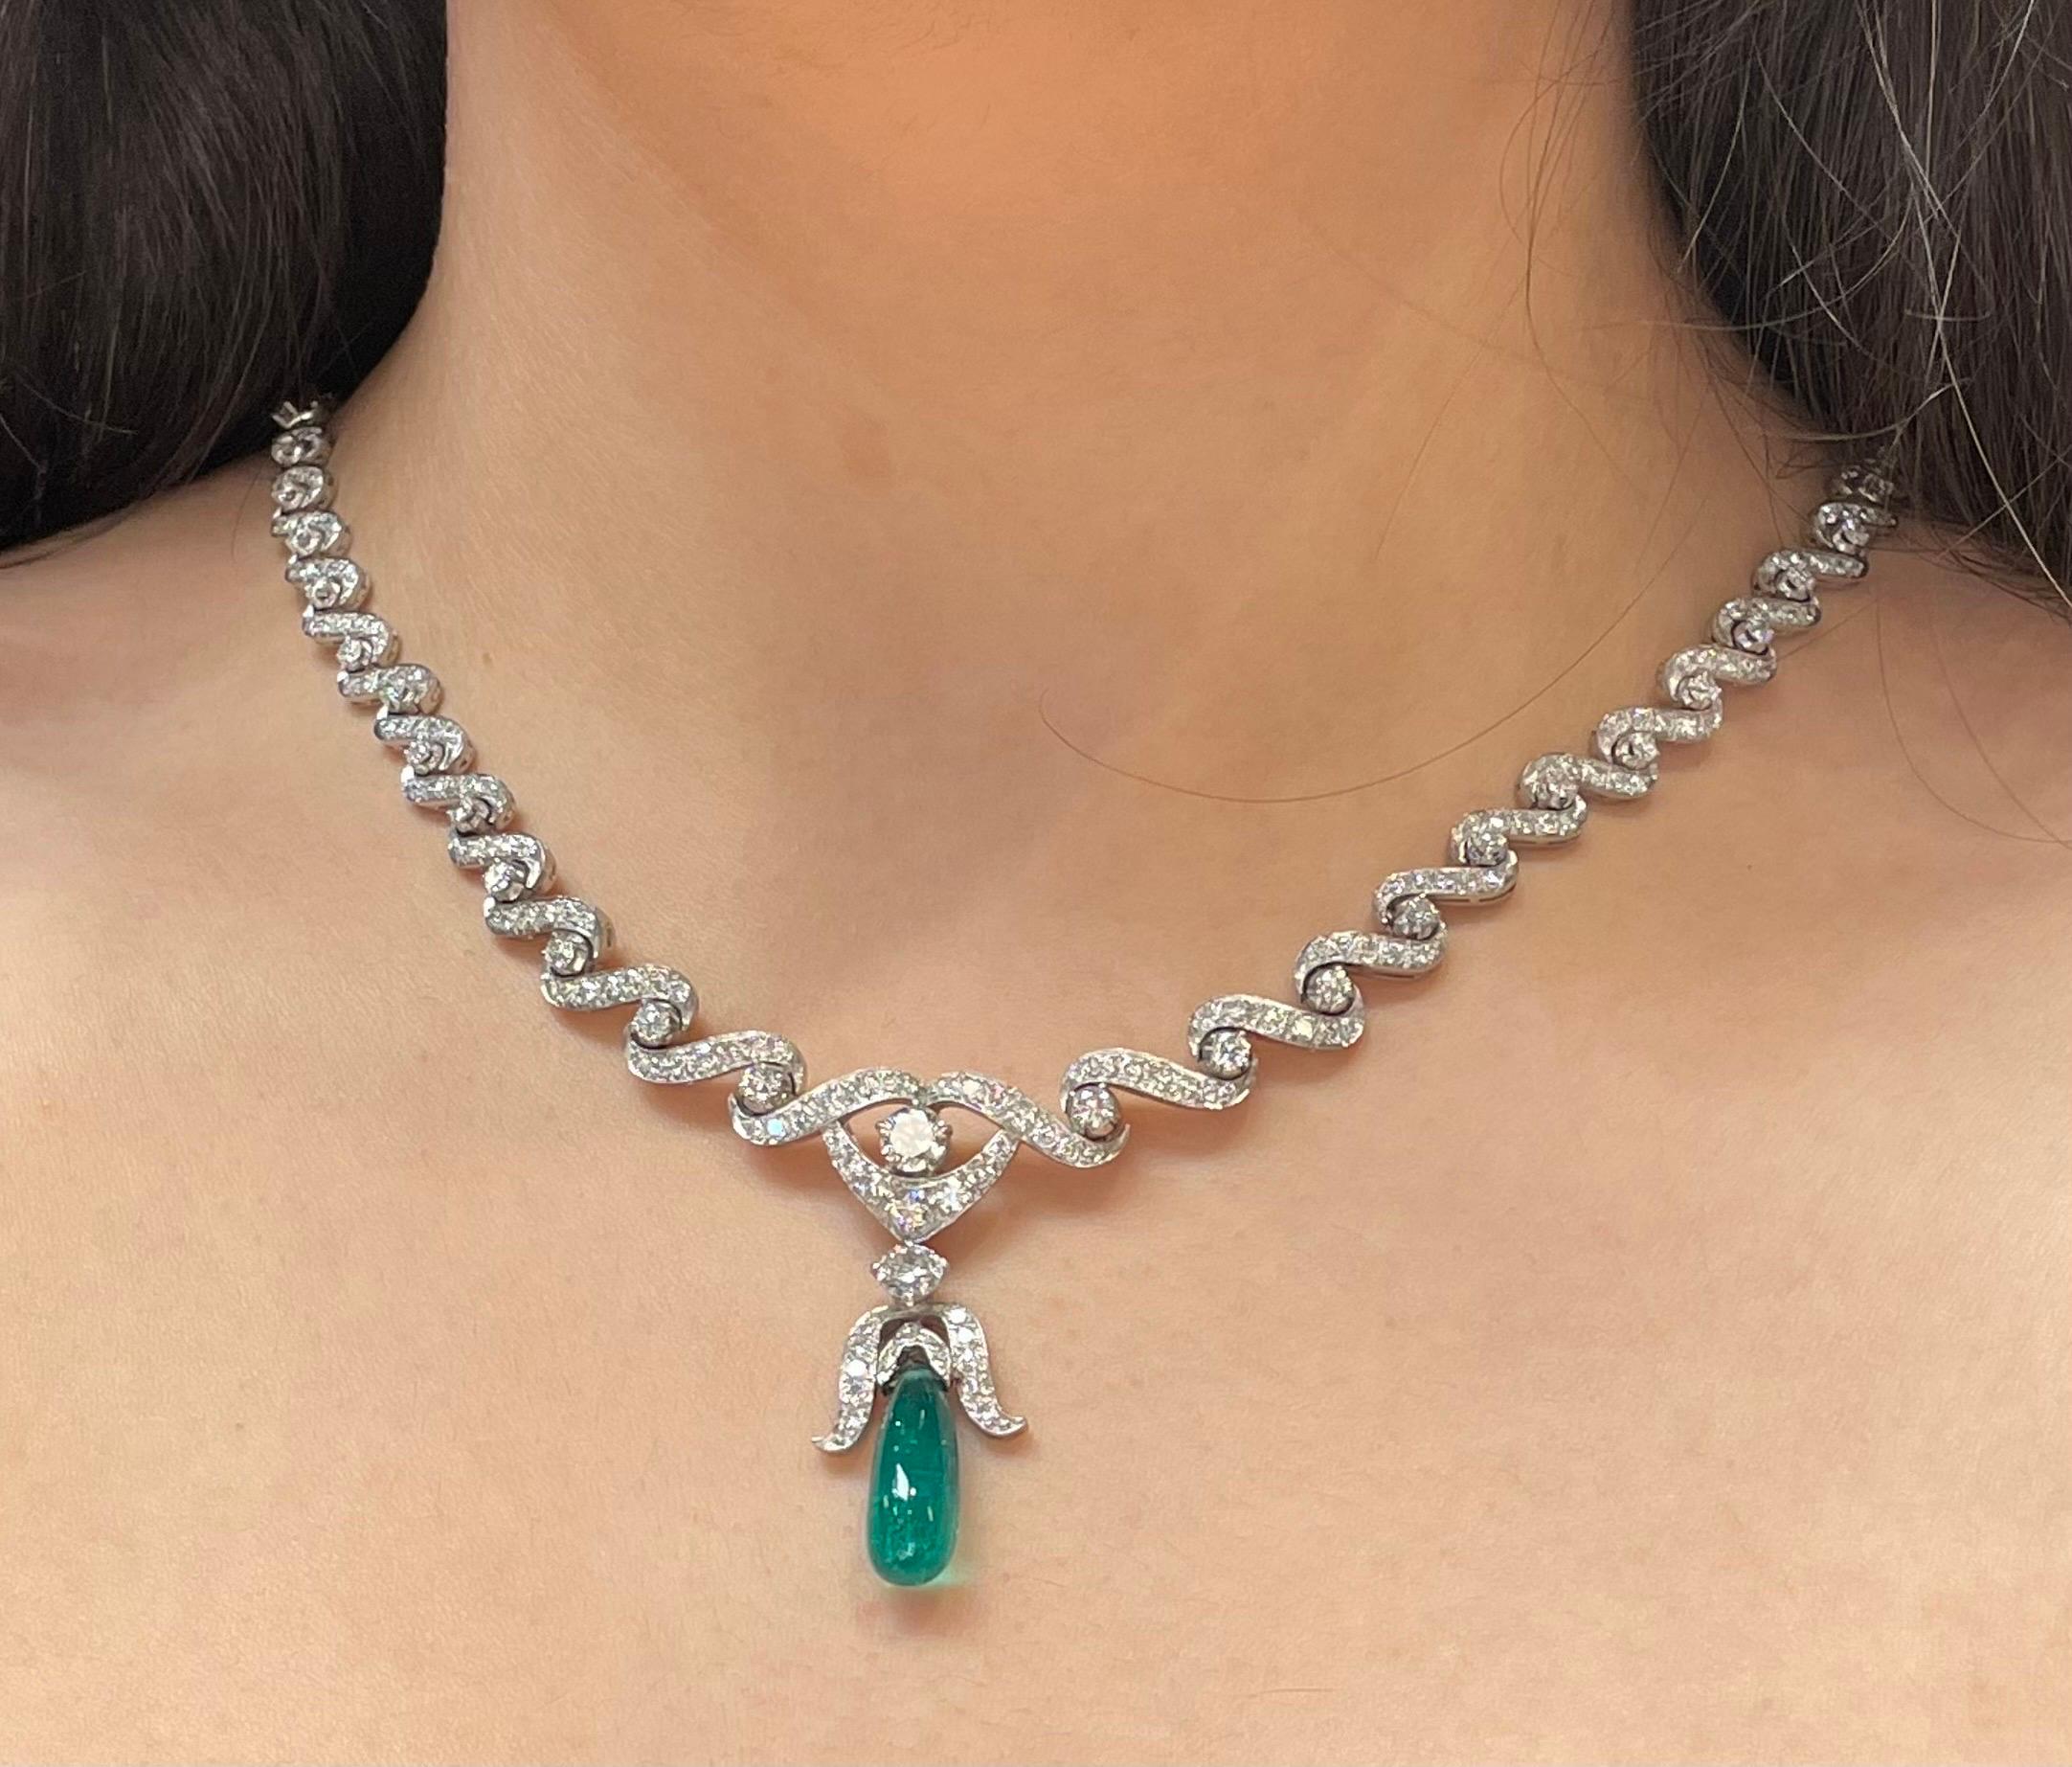 Diamond and Emerald Drop Necklace

A platinum necklace set with round-cut diamonds a pendant with an emerald drop.

Approximate Diamond Weight: 8.5 carats
Approximate Emerald Weight: 7.45 carats
Approximate Chain Length: 15